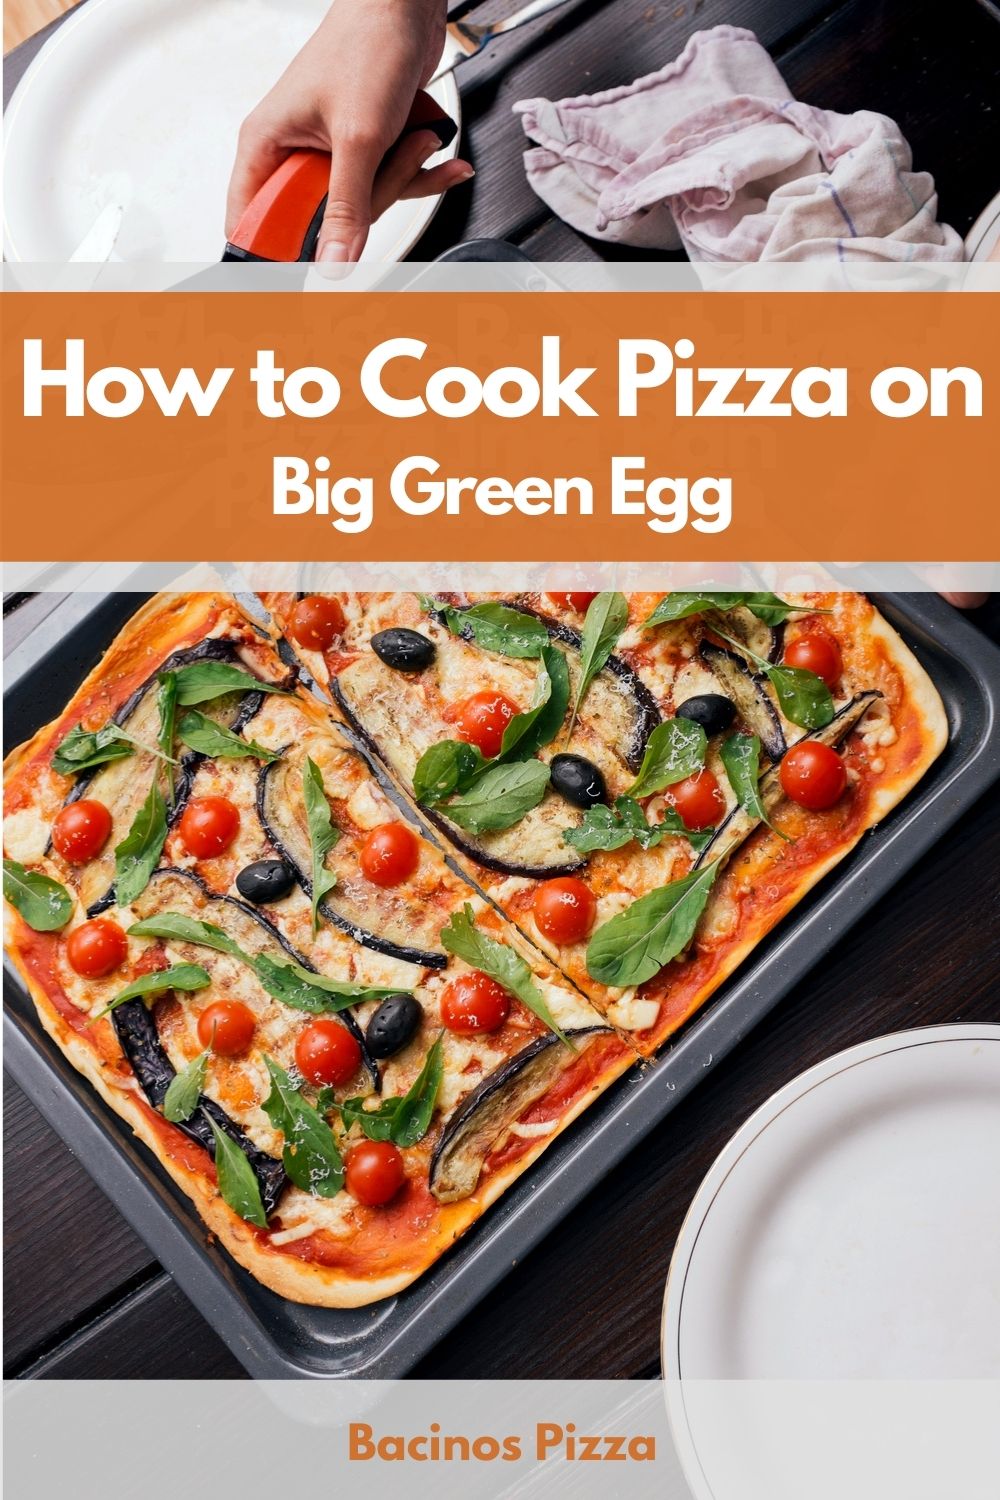 How to Cook Pizza on Big Green Egg pin 2